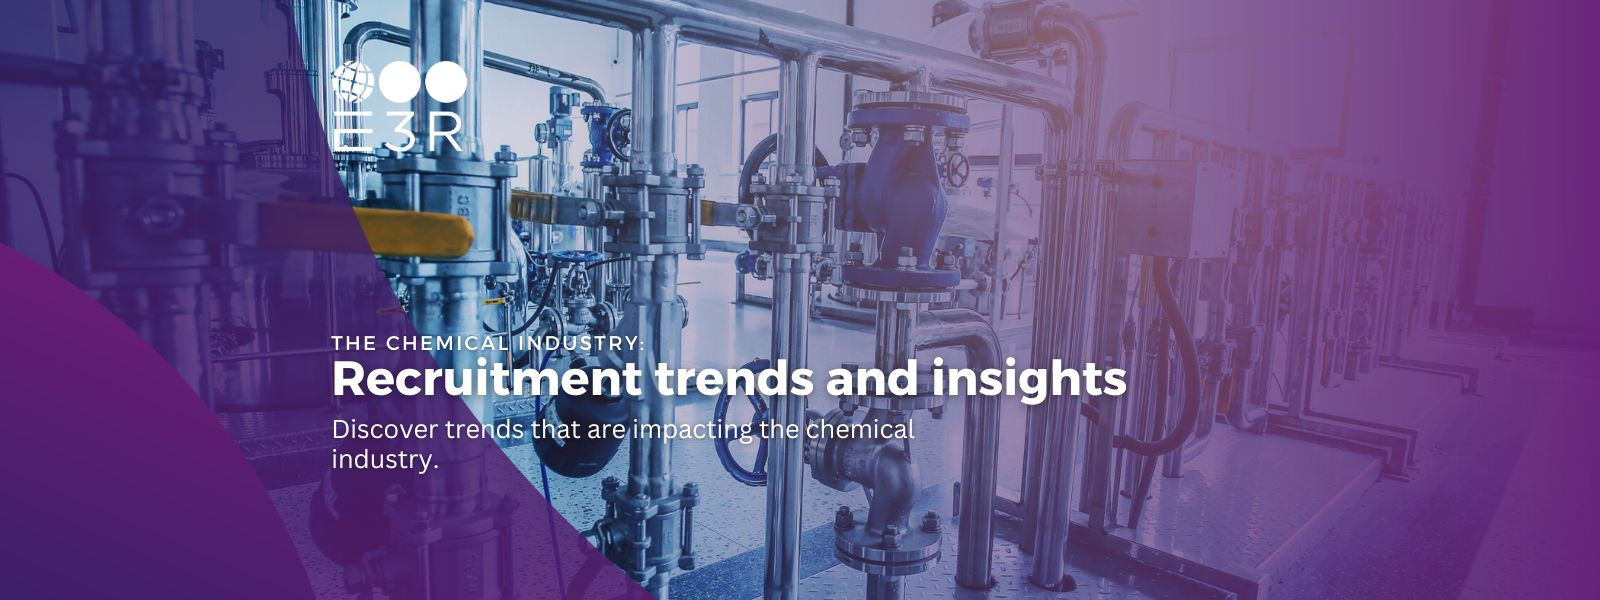 The Chemical Industry: Recruitment trends and insi...